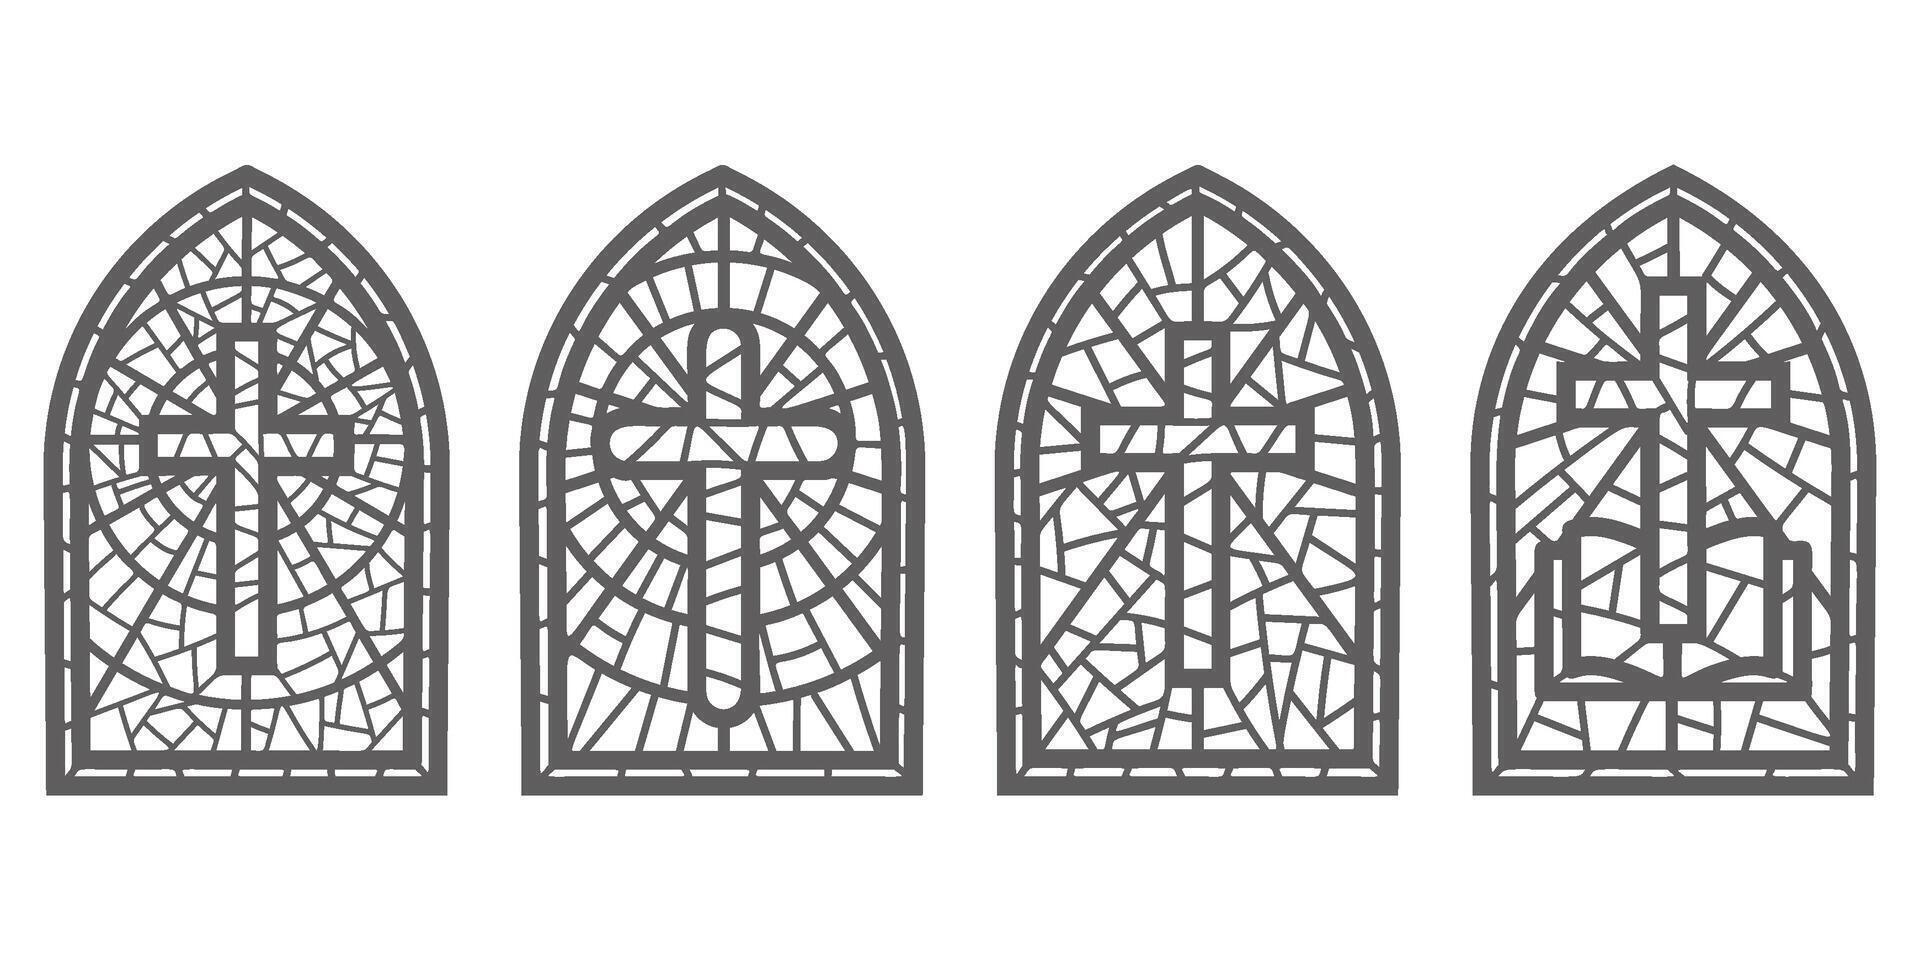 Church glass windows. Stained mosaic catholic and christian frames with cross. Vector outline gothic medieval arches isolated on white background